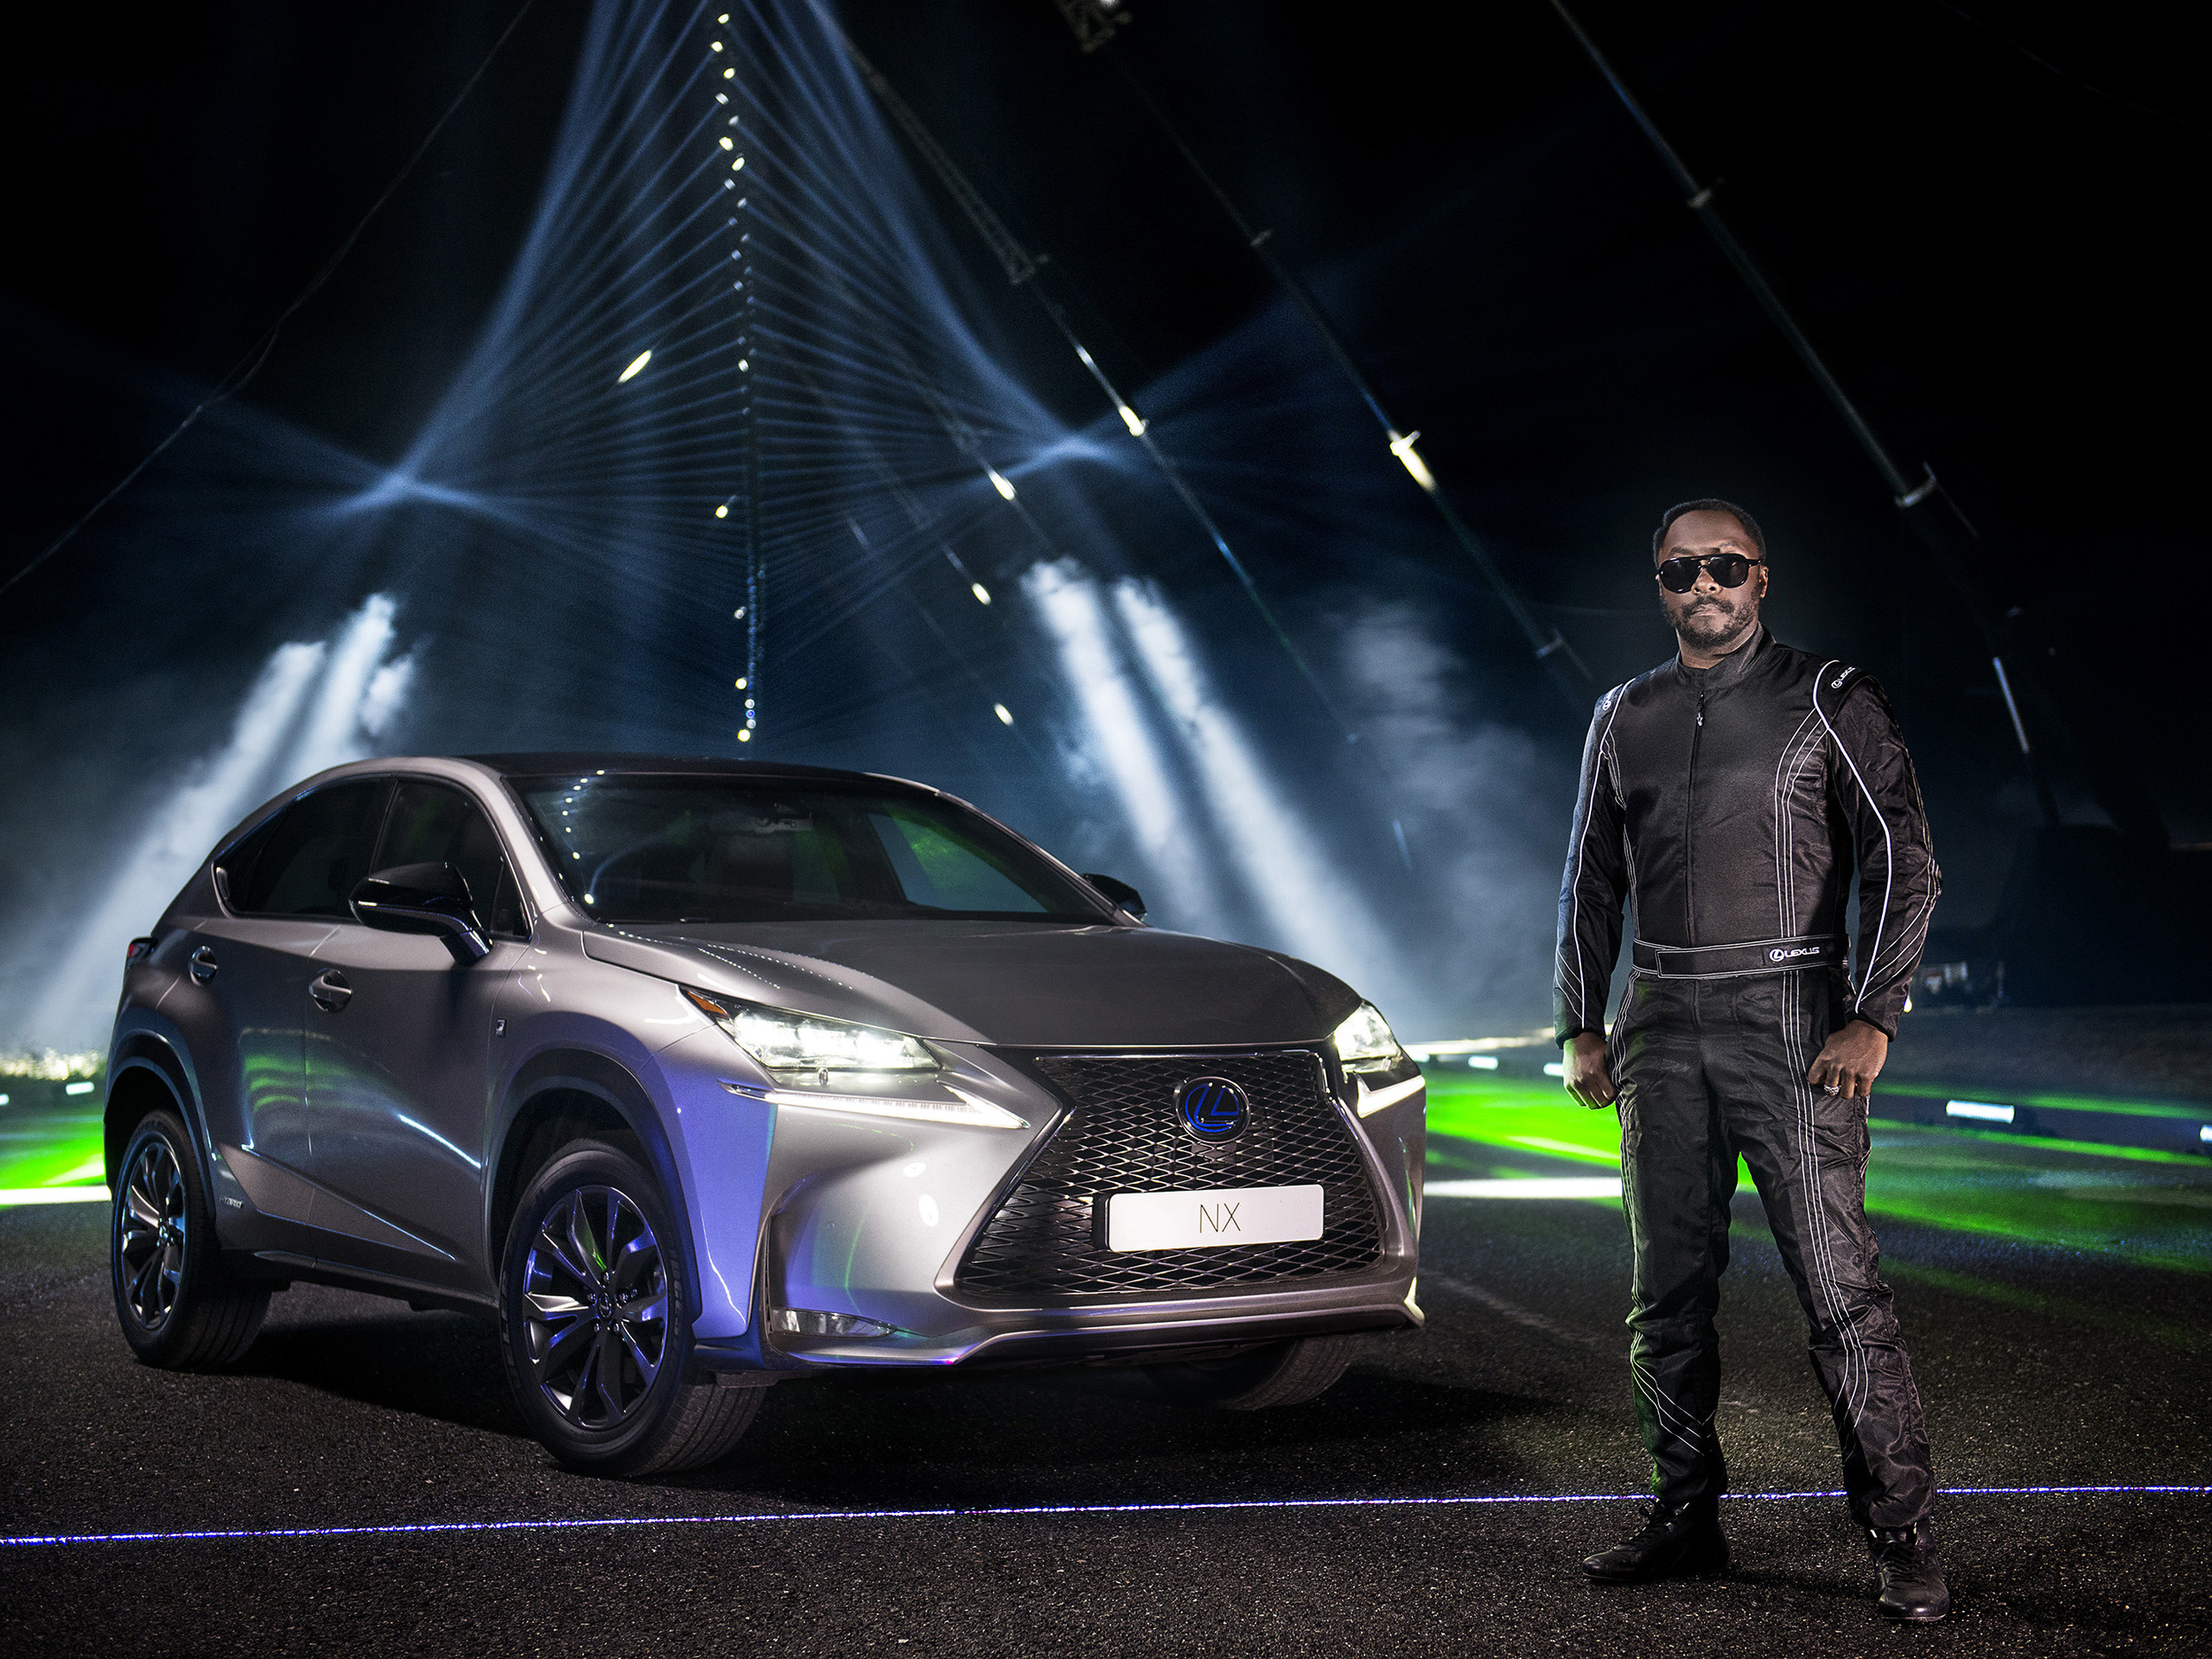 will.i.am and Lexus create Laser and sound spectacular